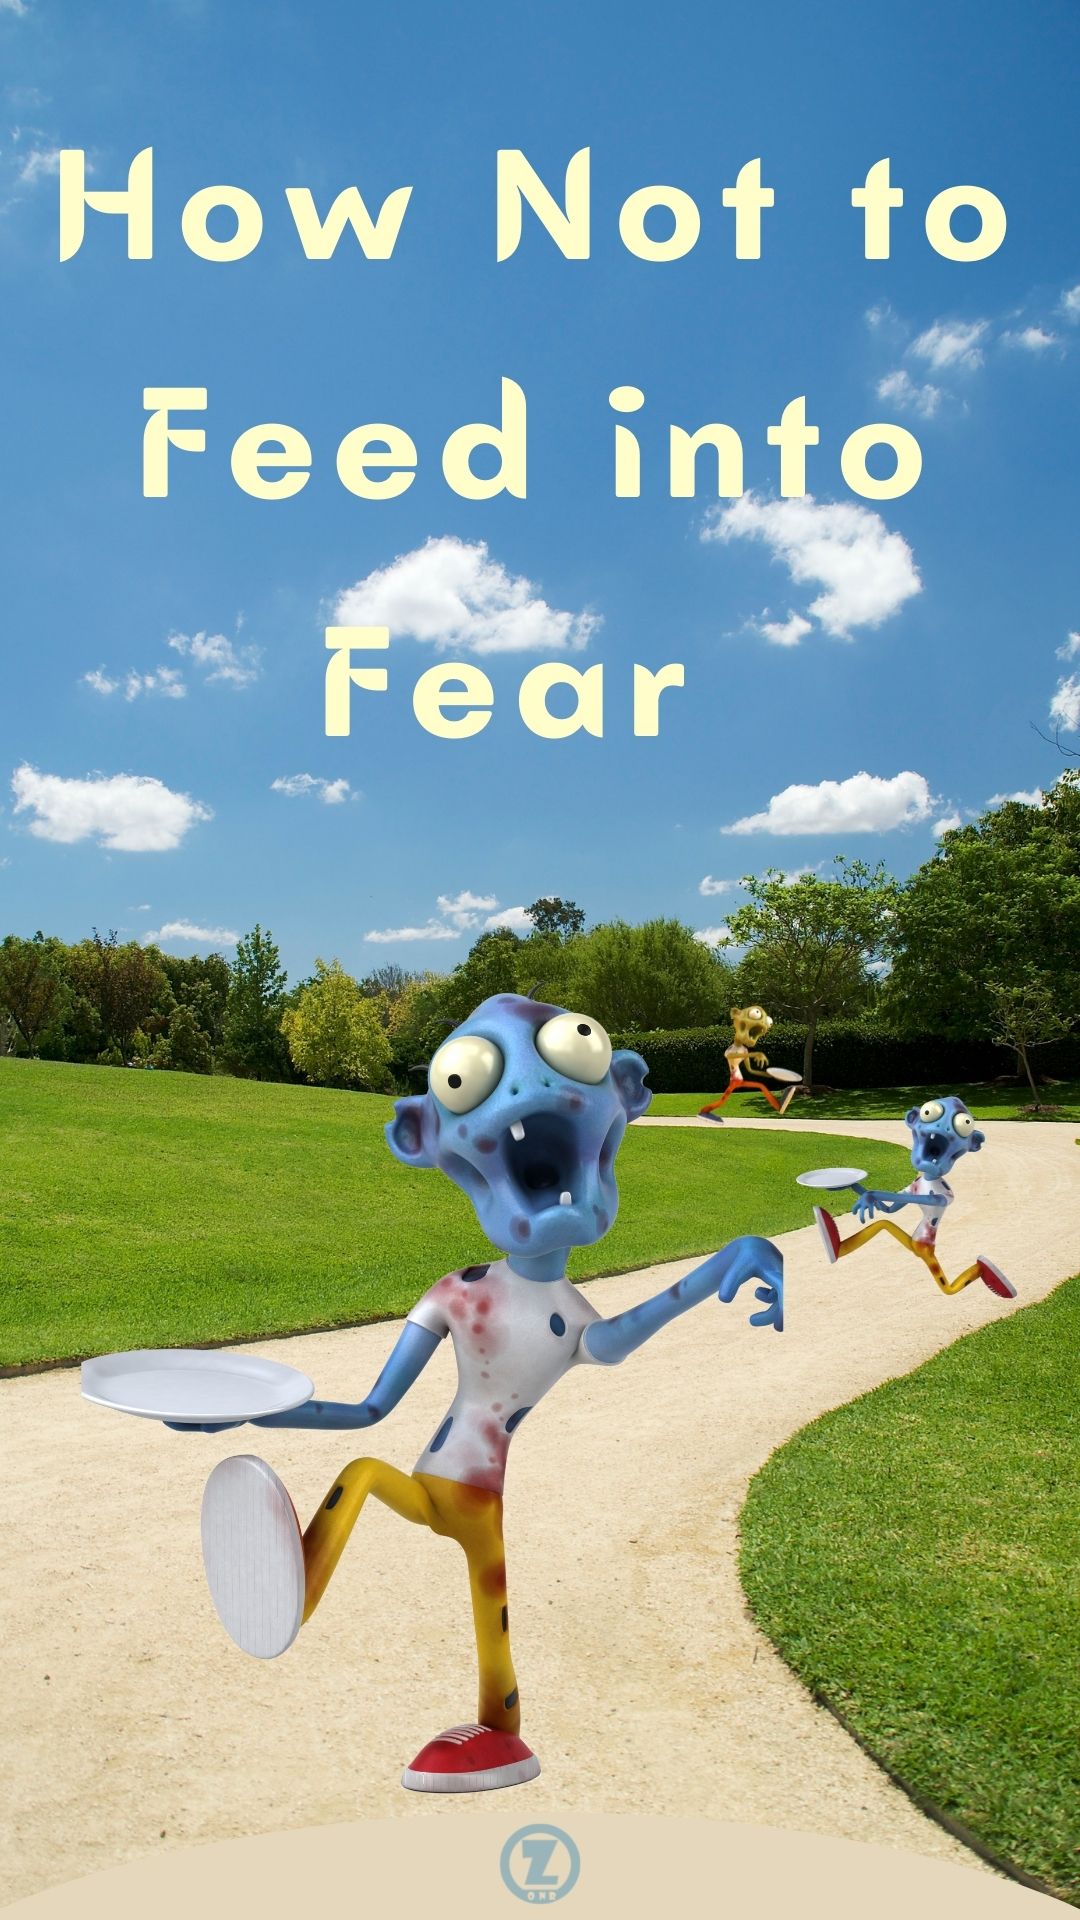 How Not to Feed into Fear so that We Won’t Miss Out on True Nourishment for the Soul – Step 1